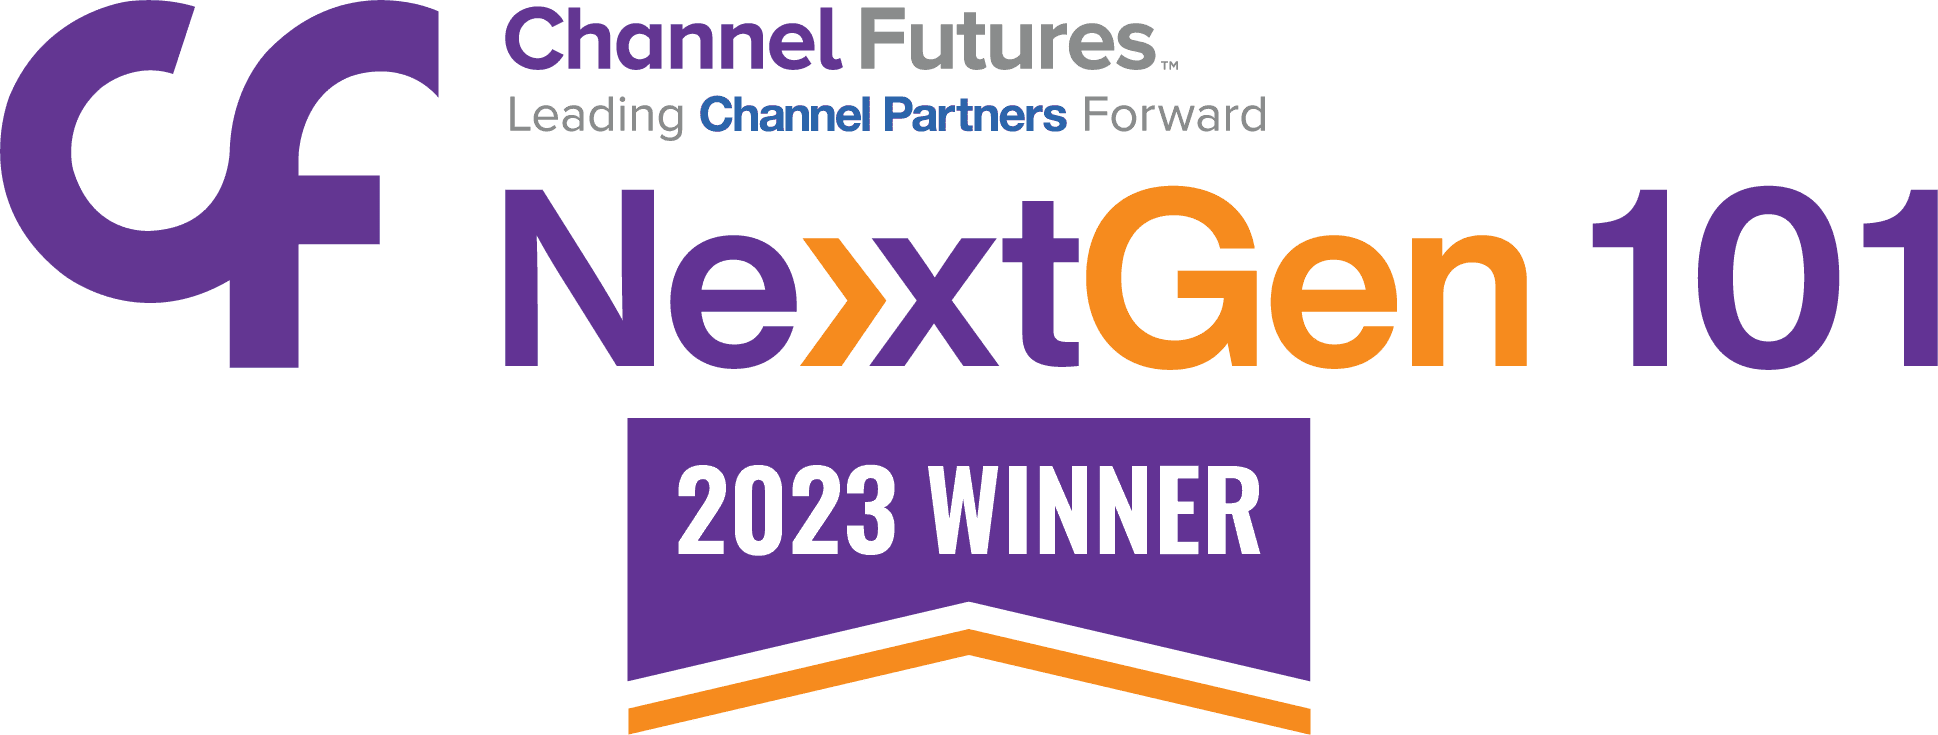 Channel Futures Next Gen 2023 Winner for business that provides IT solutions services.